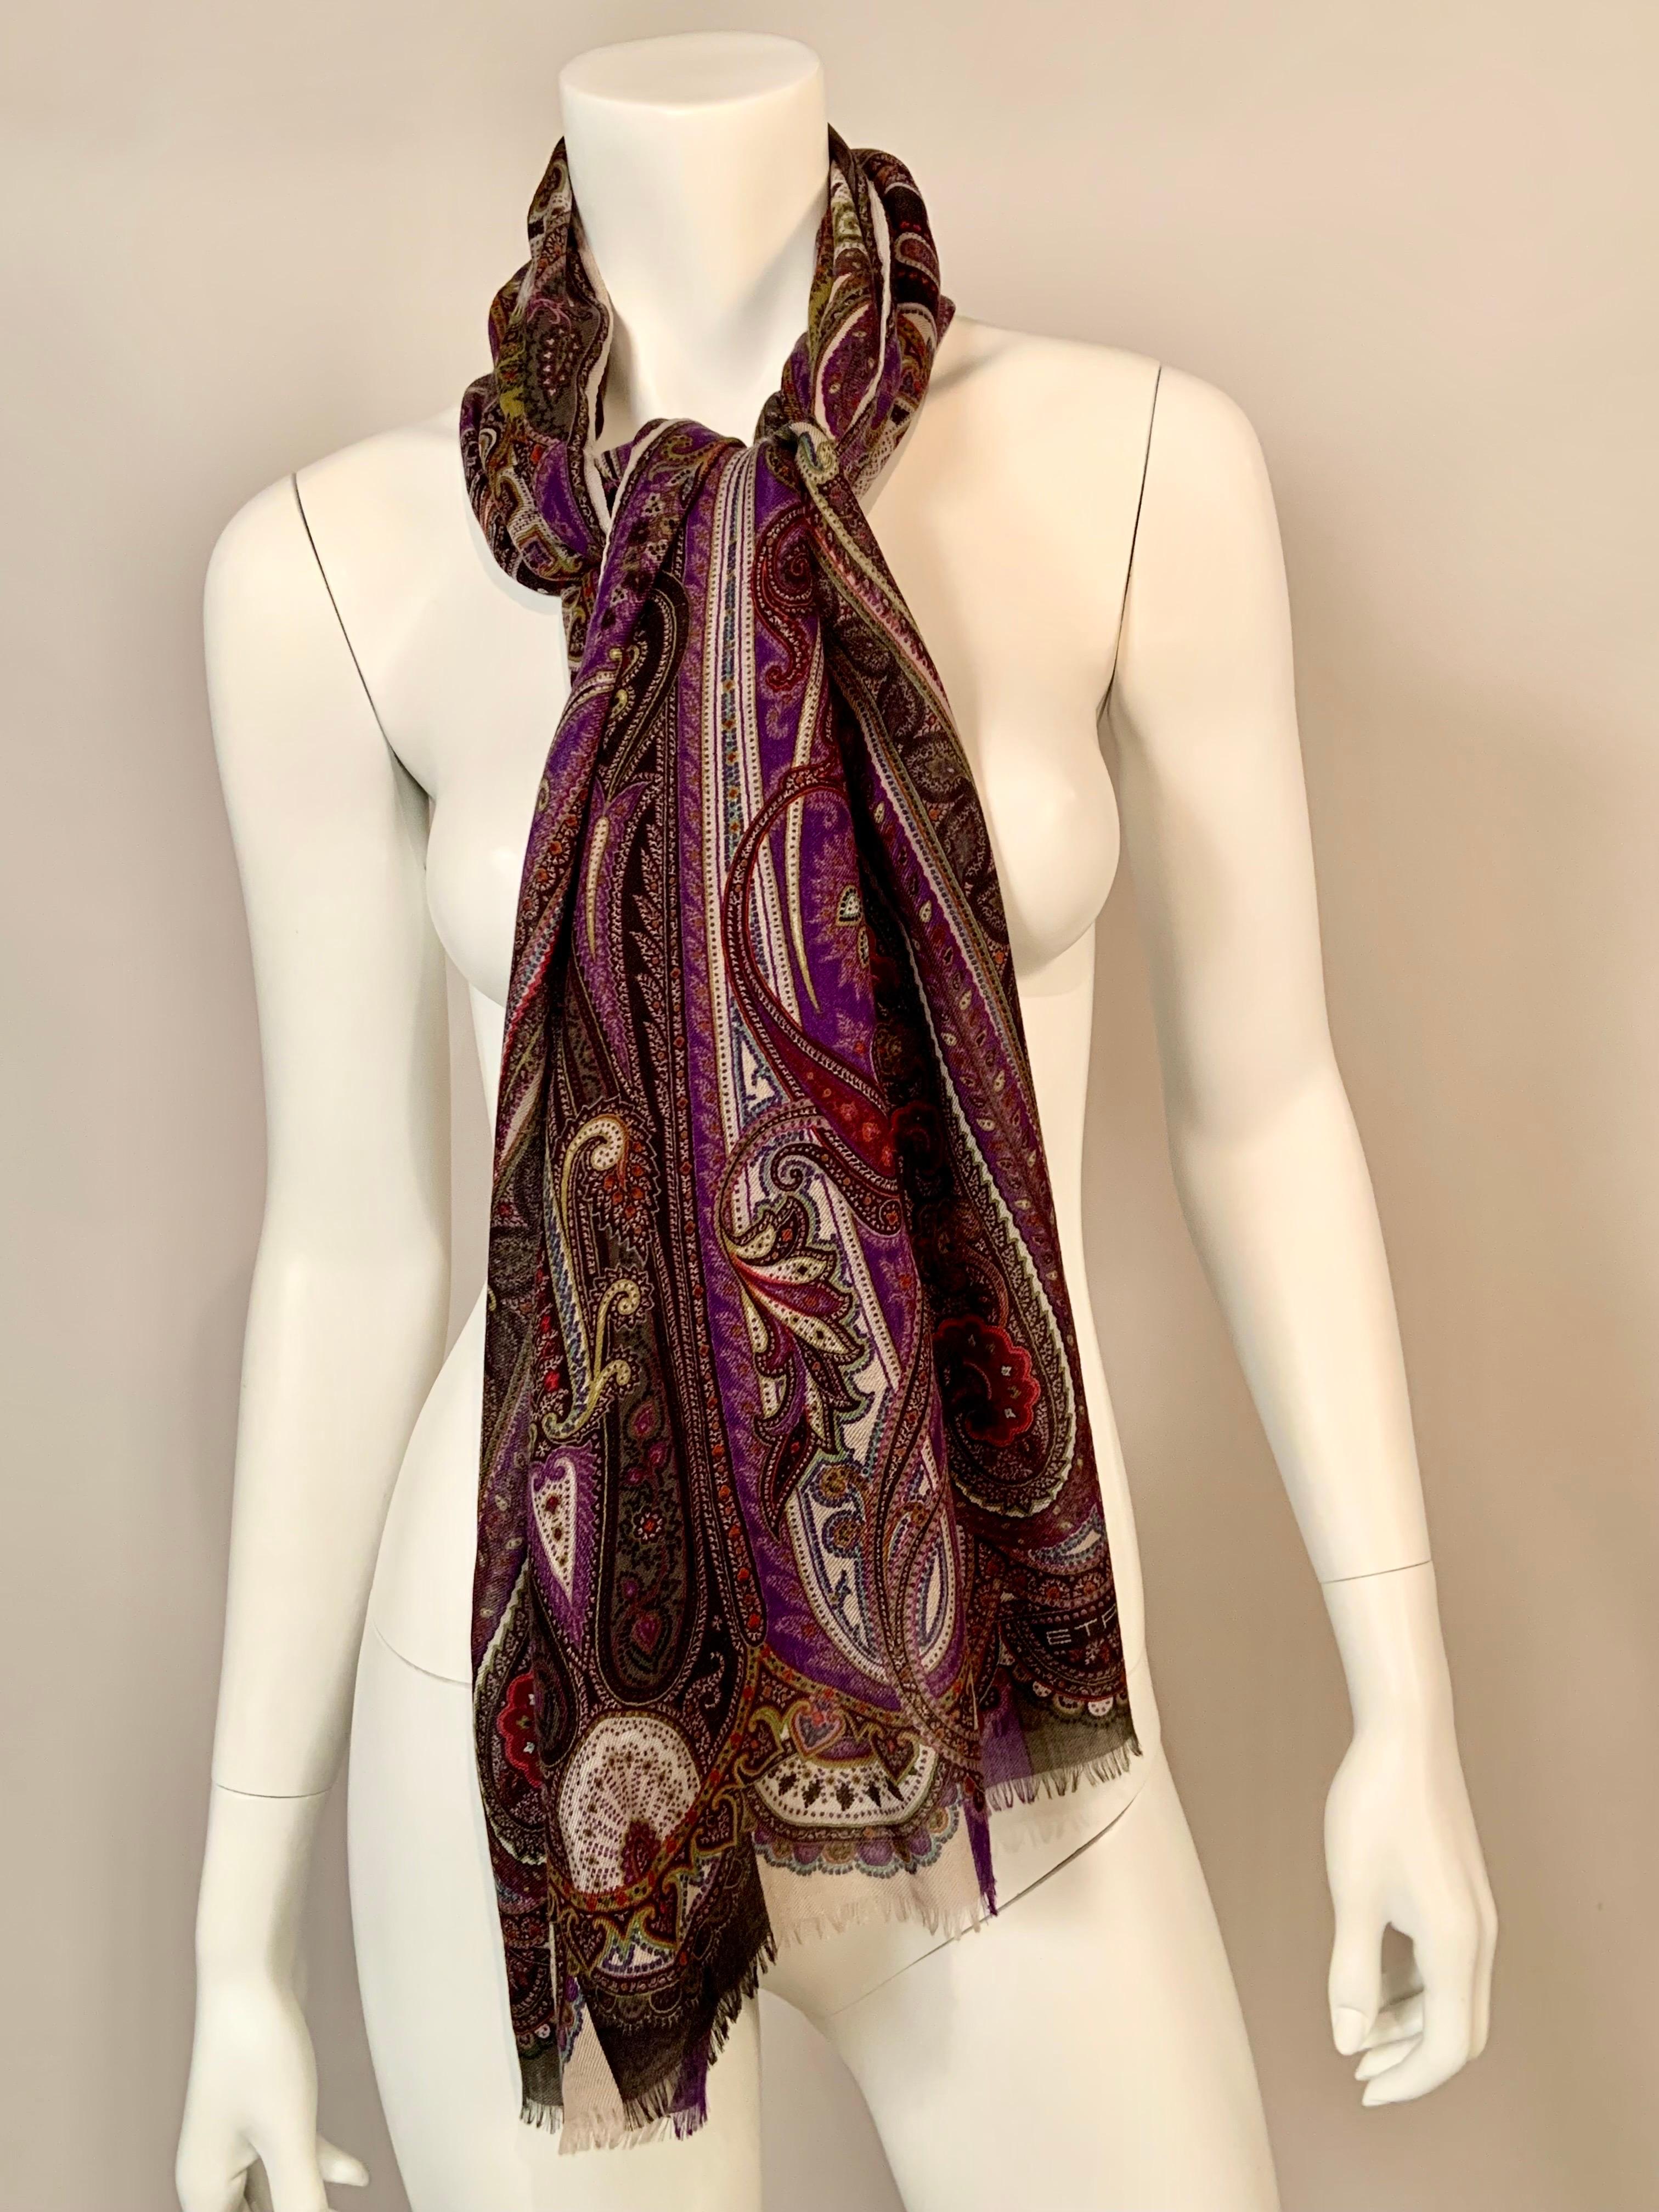 This colorful paisley patterned wool and silk scarf from Etro, Milano has a white center with chartreuse panels and paisley designs in shades purple, olive, lavender, chartreuse and white. It is marked Etro in the design on one corner and also bears